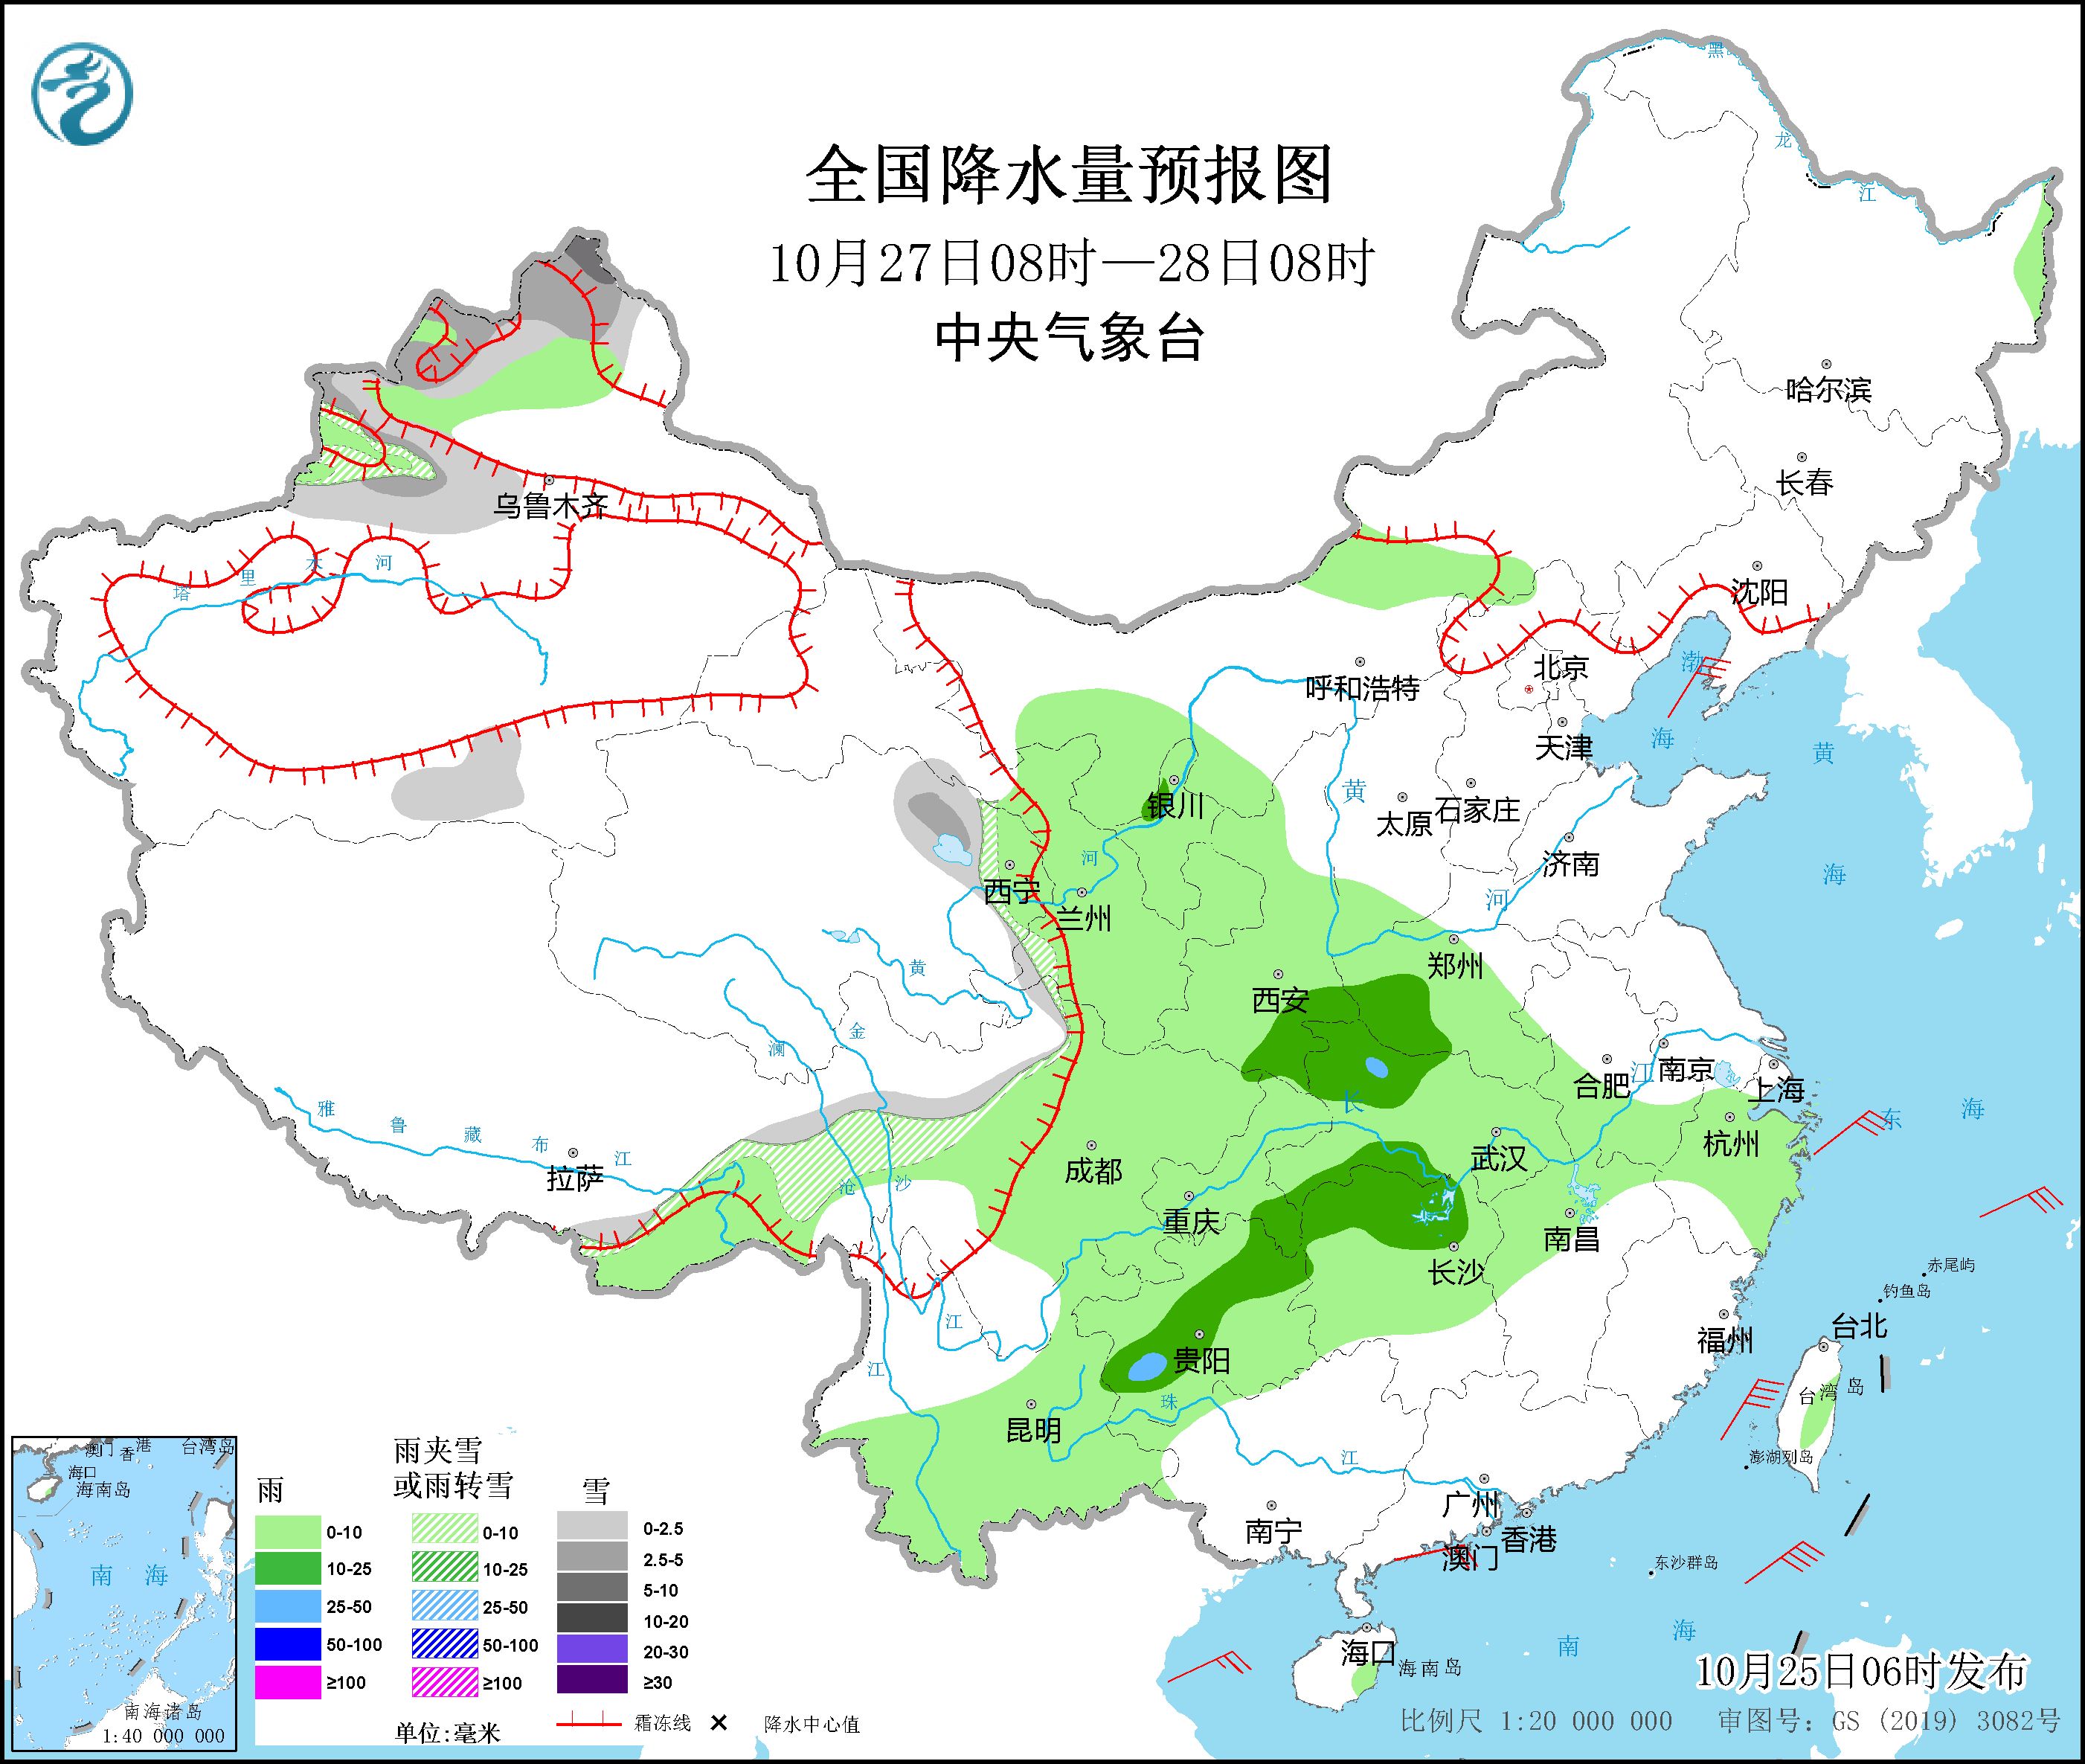 There is still strong rain and snow in the eastern part of the Qinghai-Tibet Plateau and cold air will affect North China and Northeast China